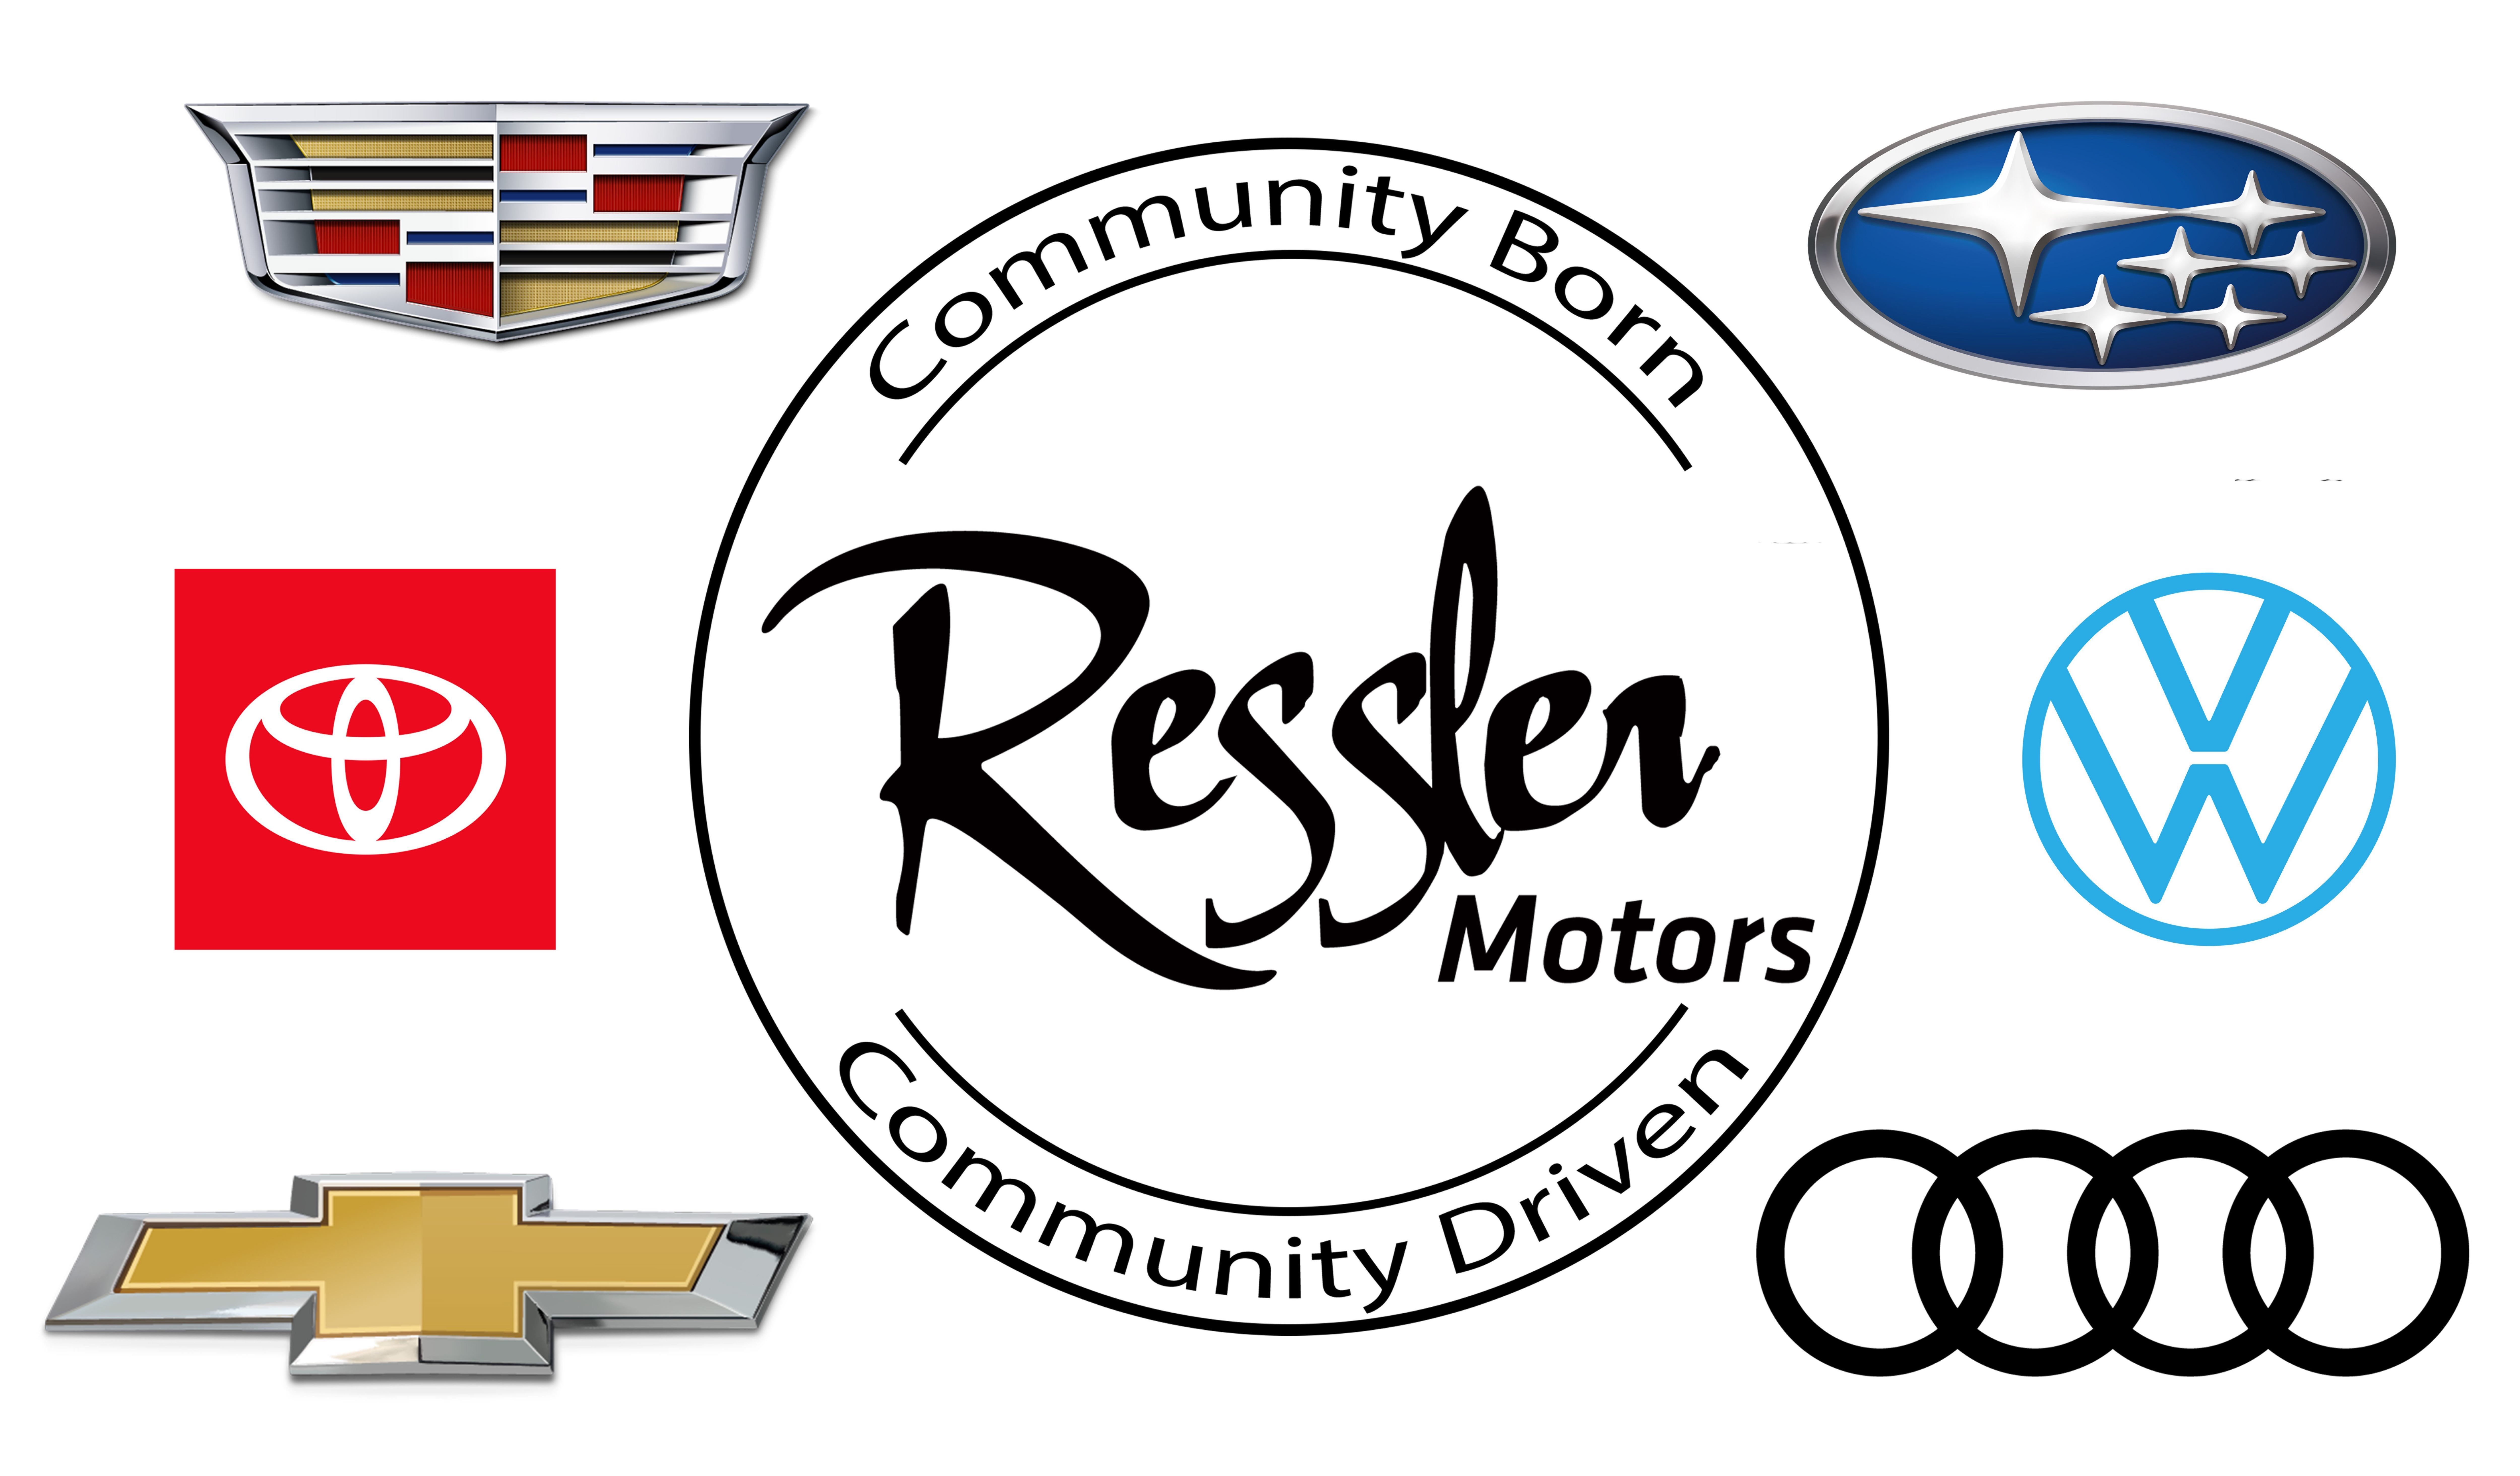 Ressler grouped colored logos